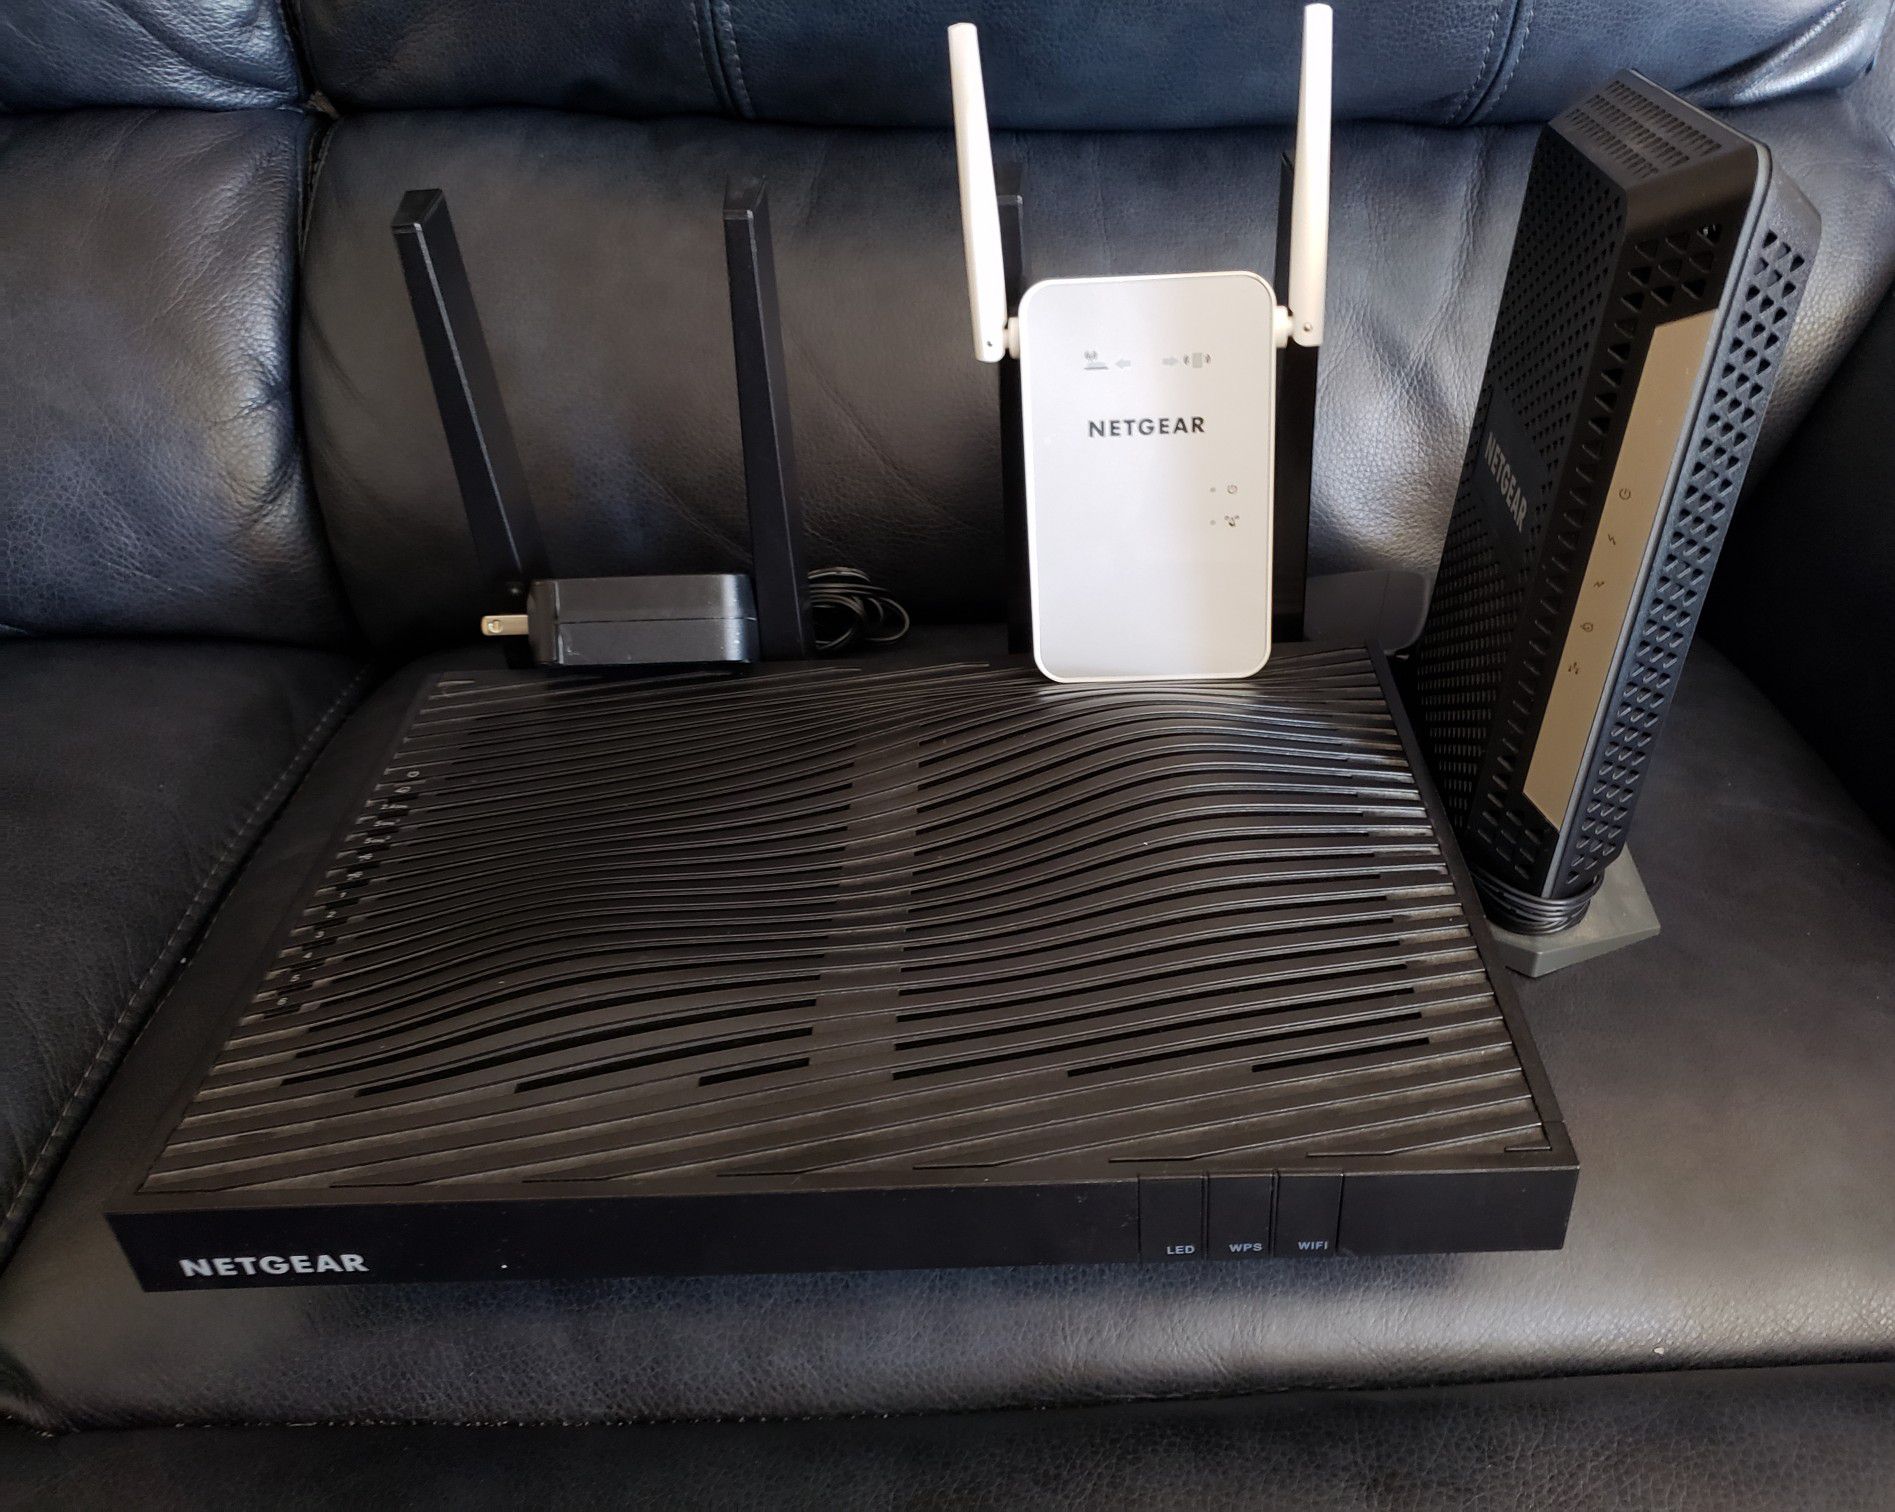 Modem, Wifi Router and Wifi Extender